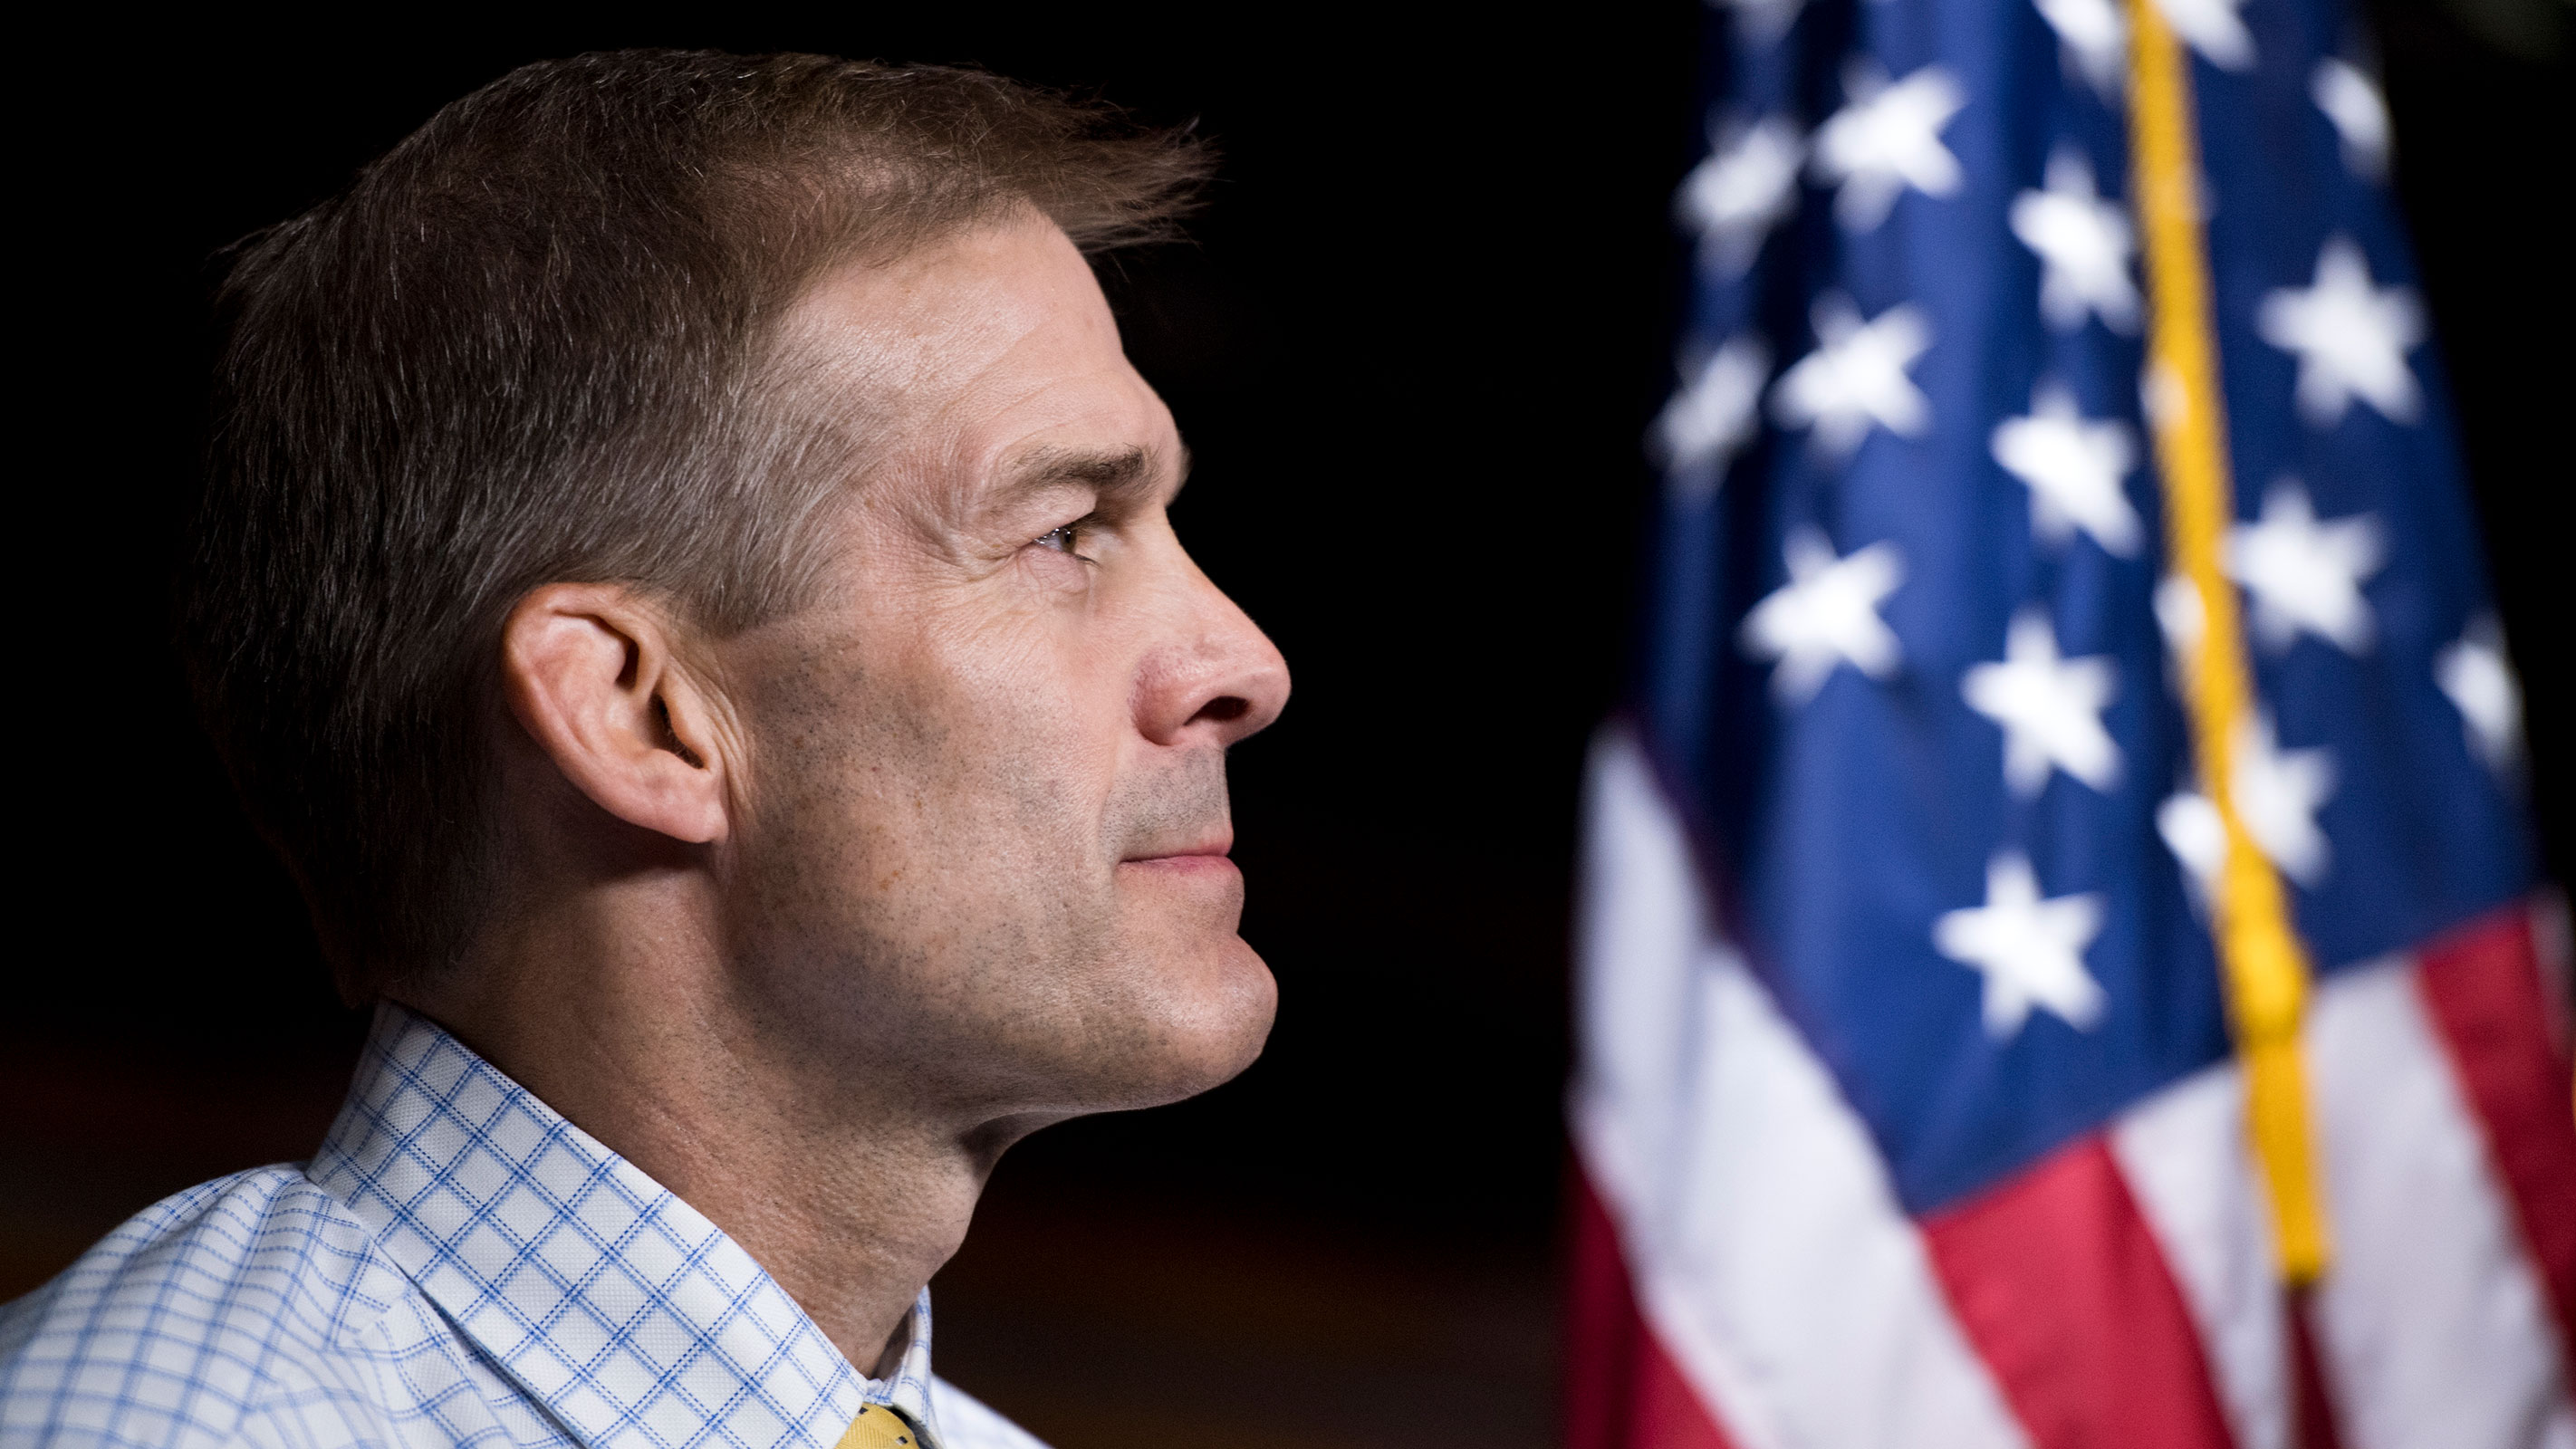 Rep. Jim Jordan participates in the press conference calling on President Trump to declassify the Carter Page FISA applications on Thursday, September 6, 2018.